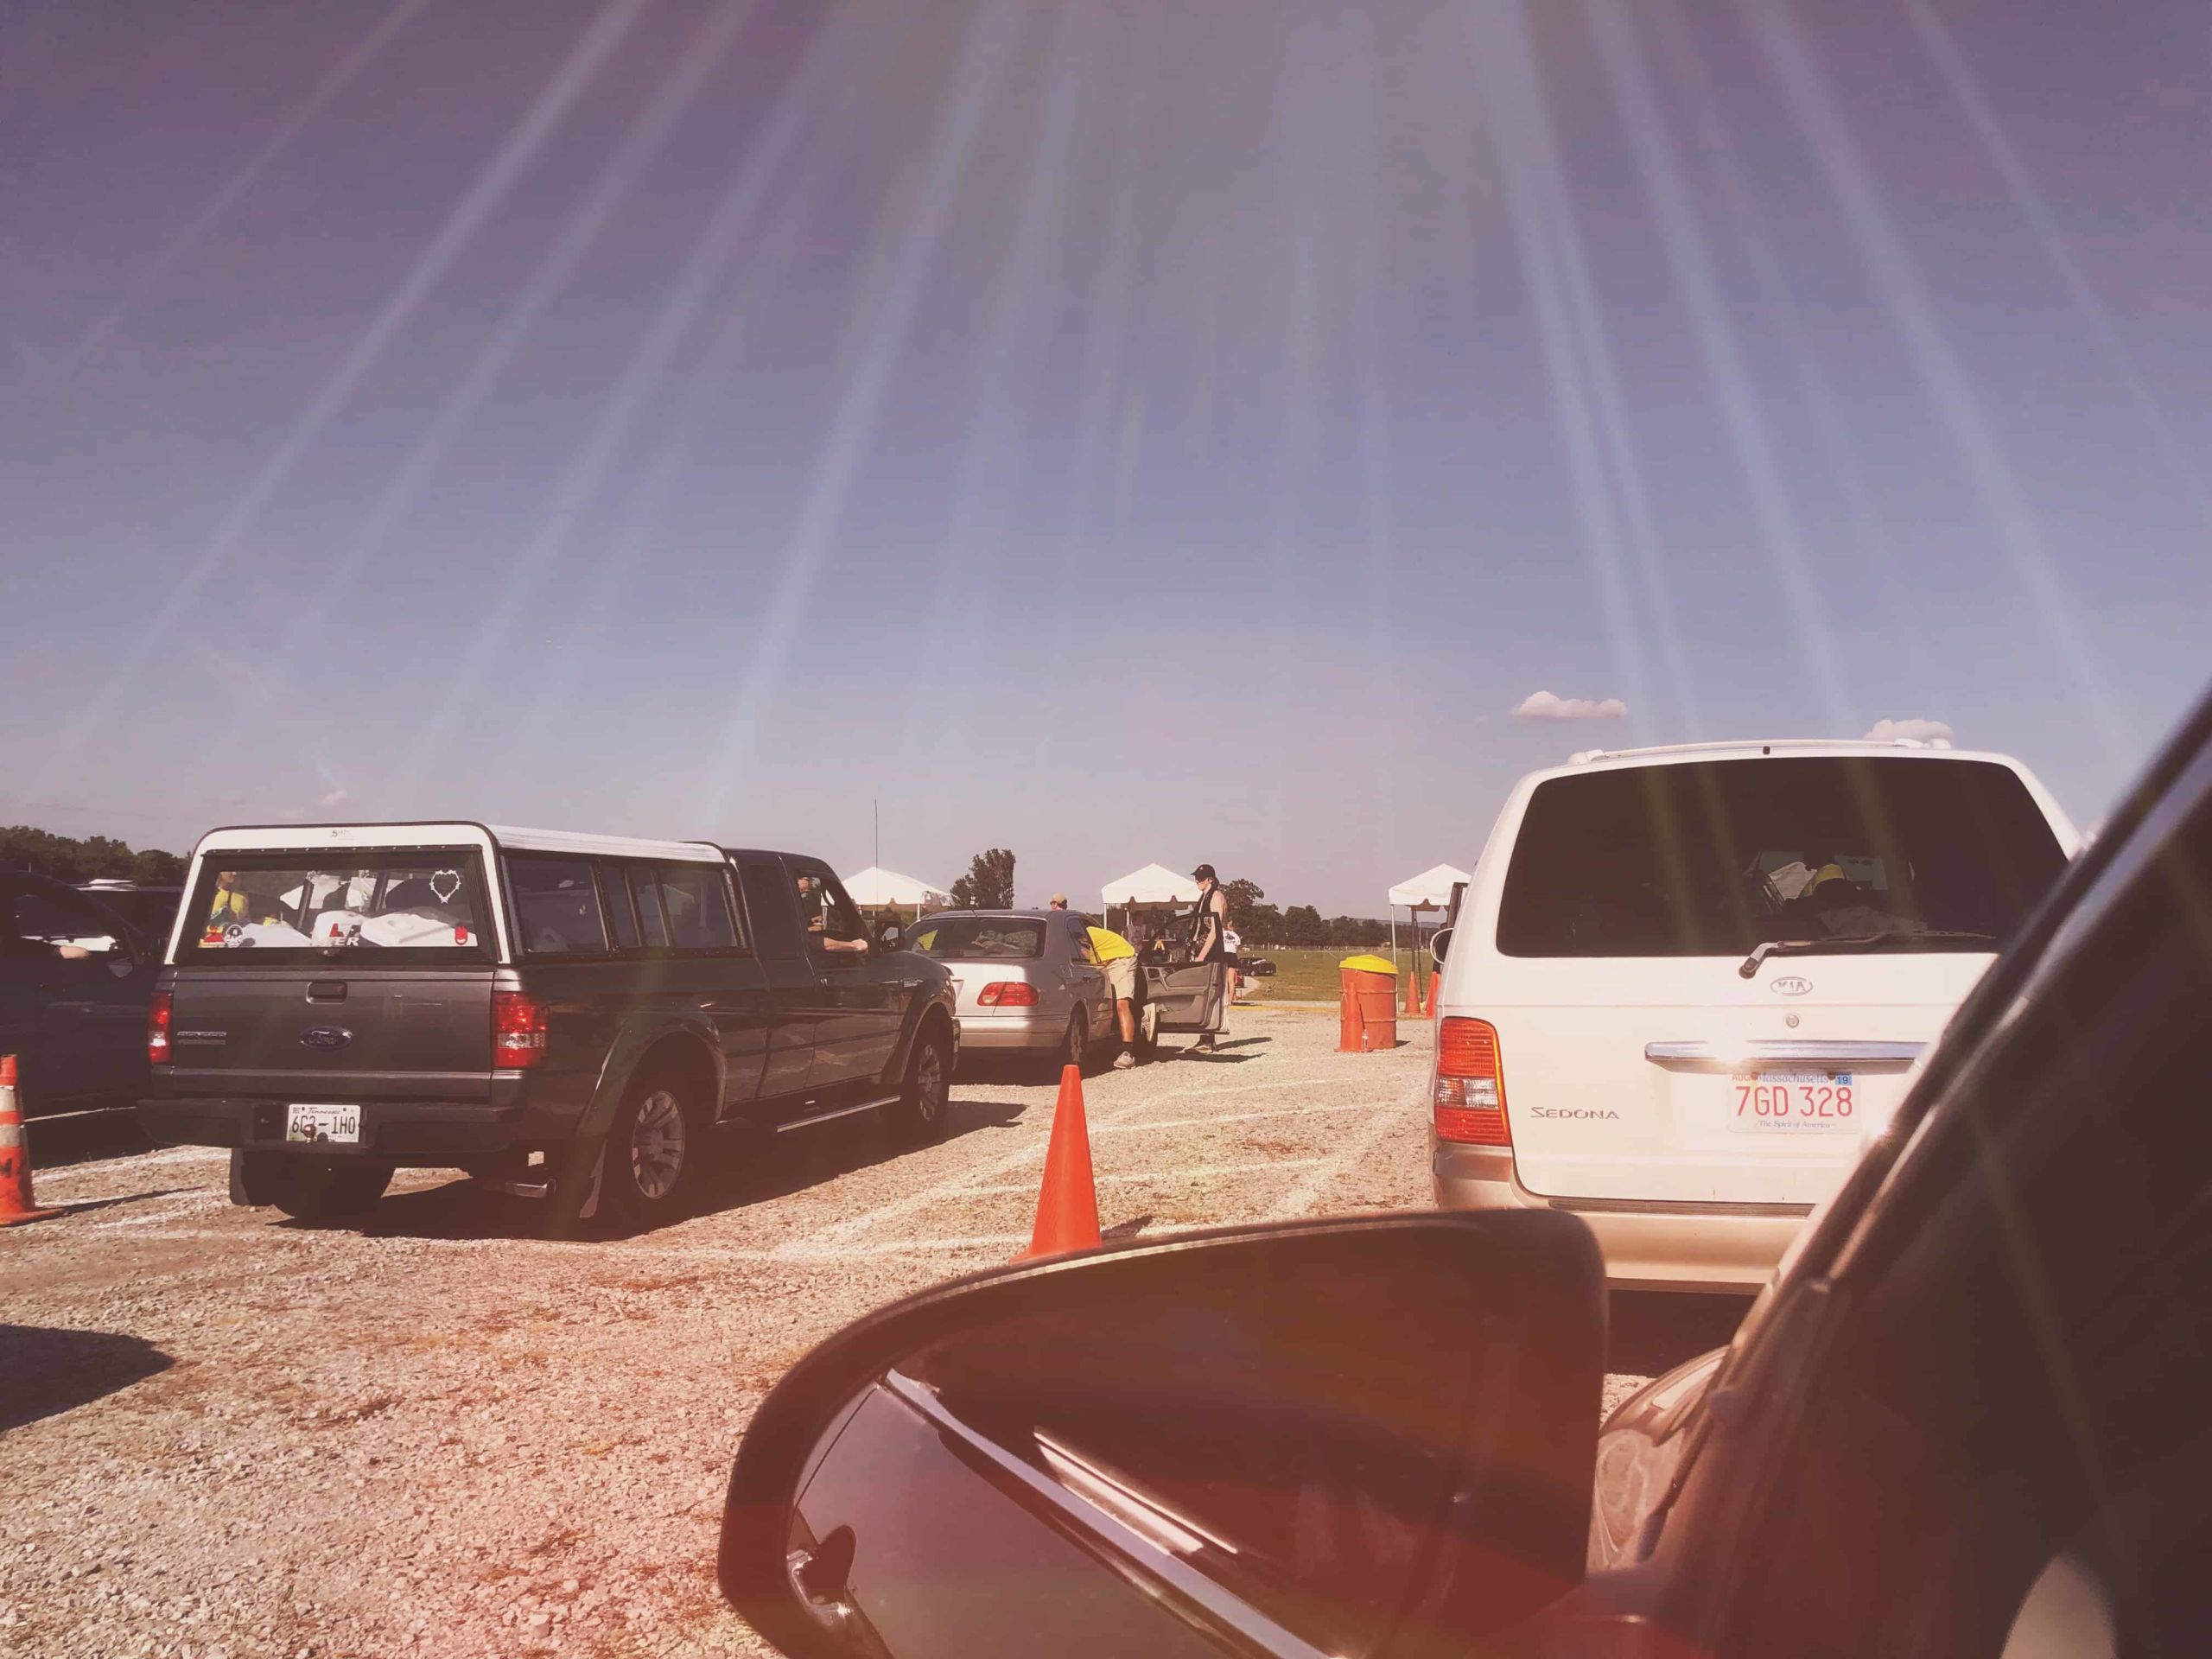 Learn about car checks and security at Bonnaroo!